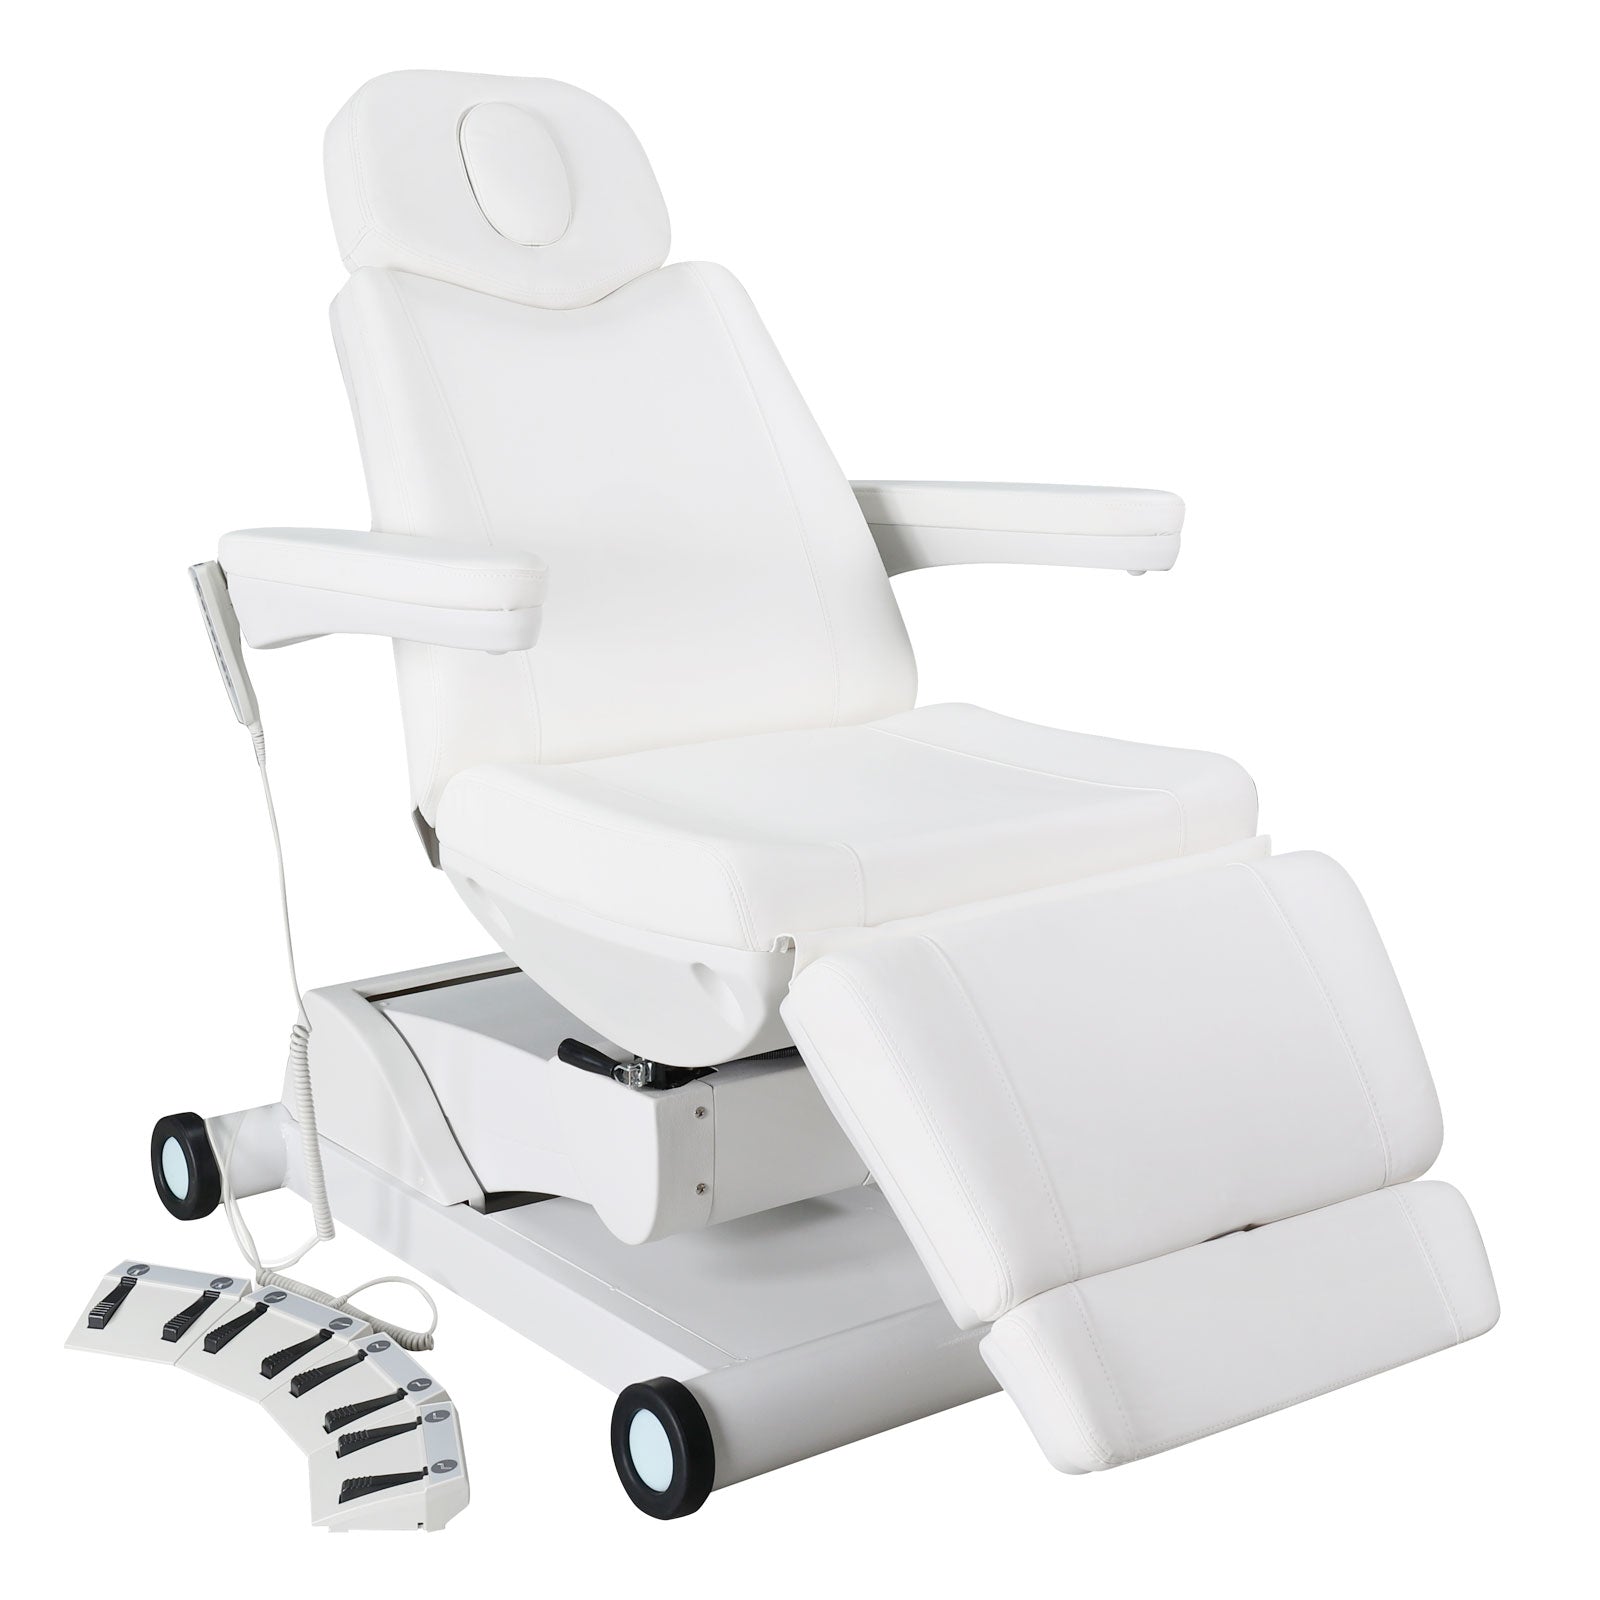 #2906 4 Motors Aesthetic Chair Dual Control Full Electrical Medical Facial Beds for Esthetician Beauty Bed Foldable Leg Cushion Podiatry Doctors Chair